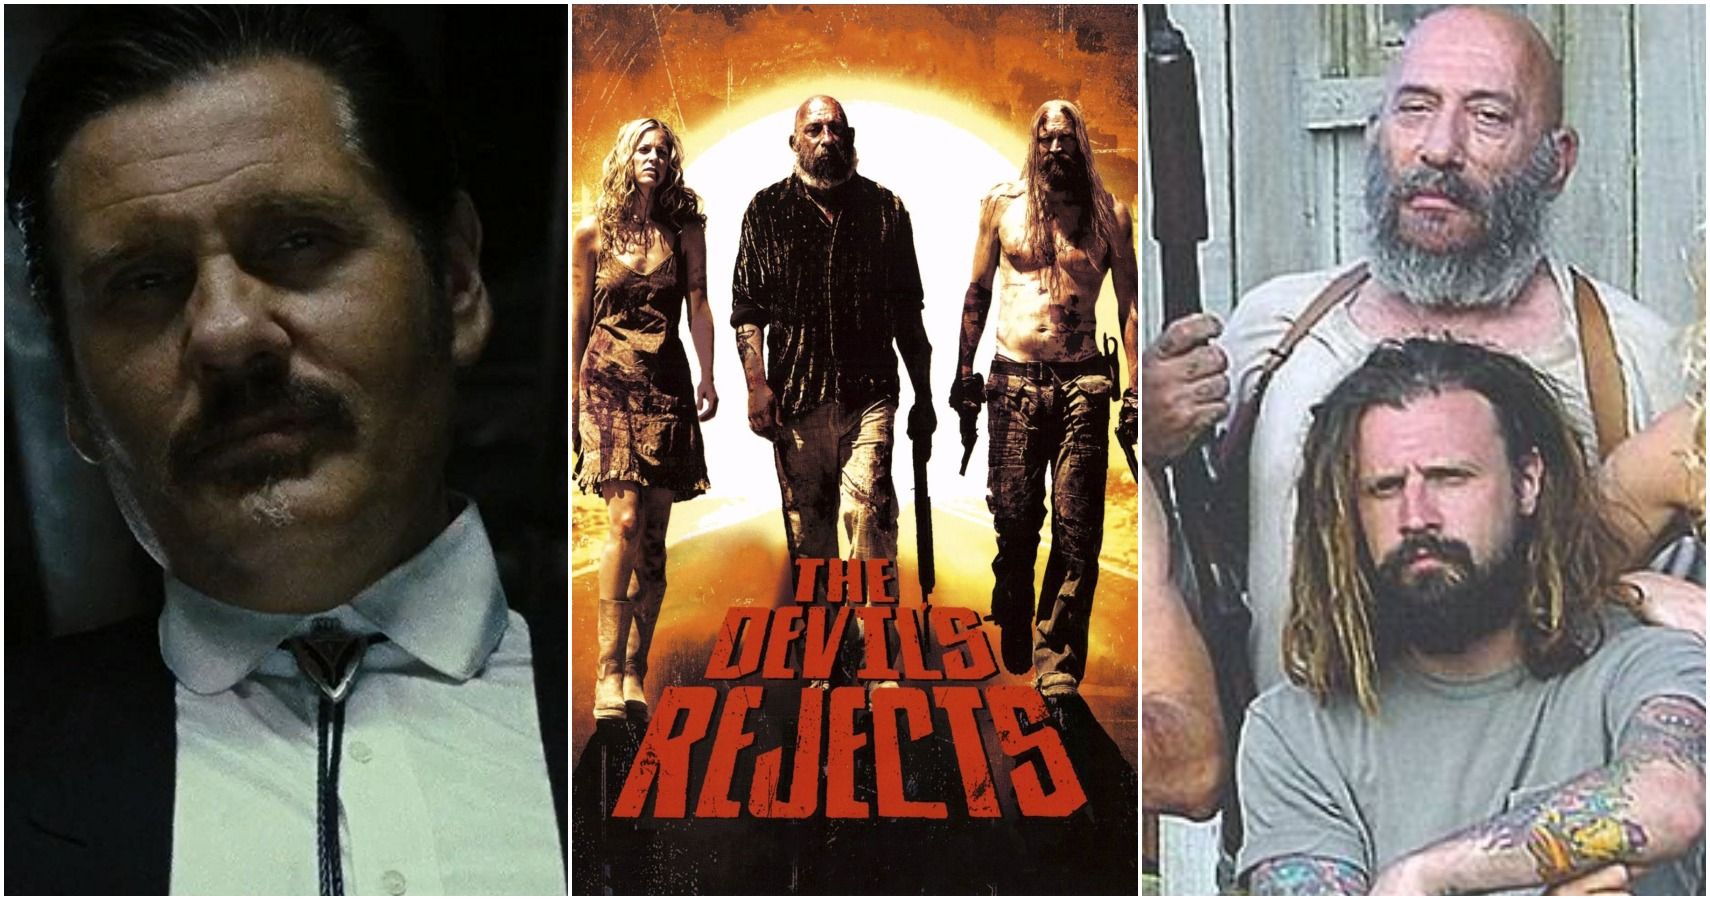 The Devils Rejects 10 BehindTheScenes Facts About Rob Zombies Sequel. 